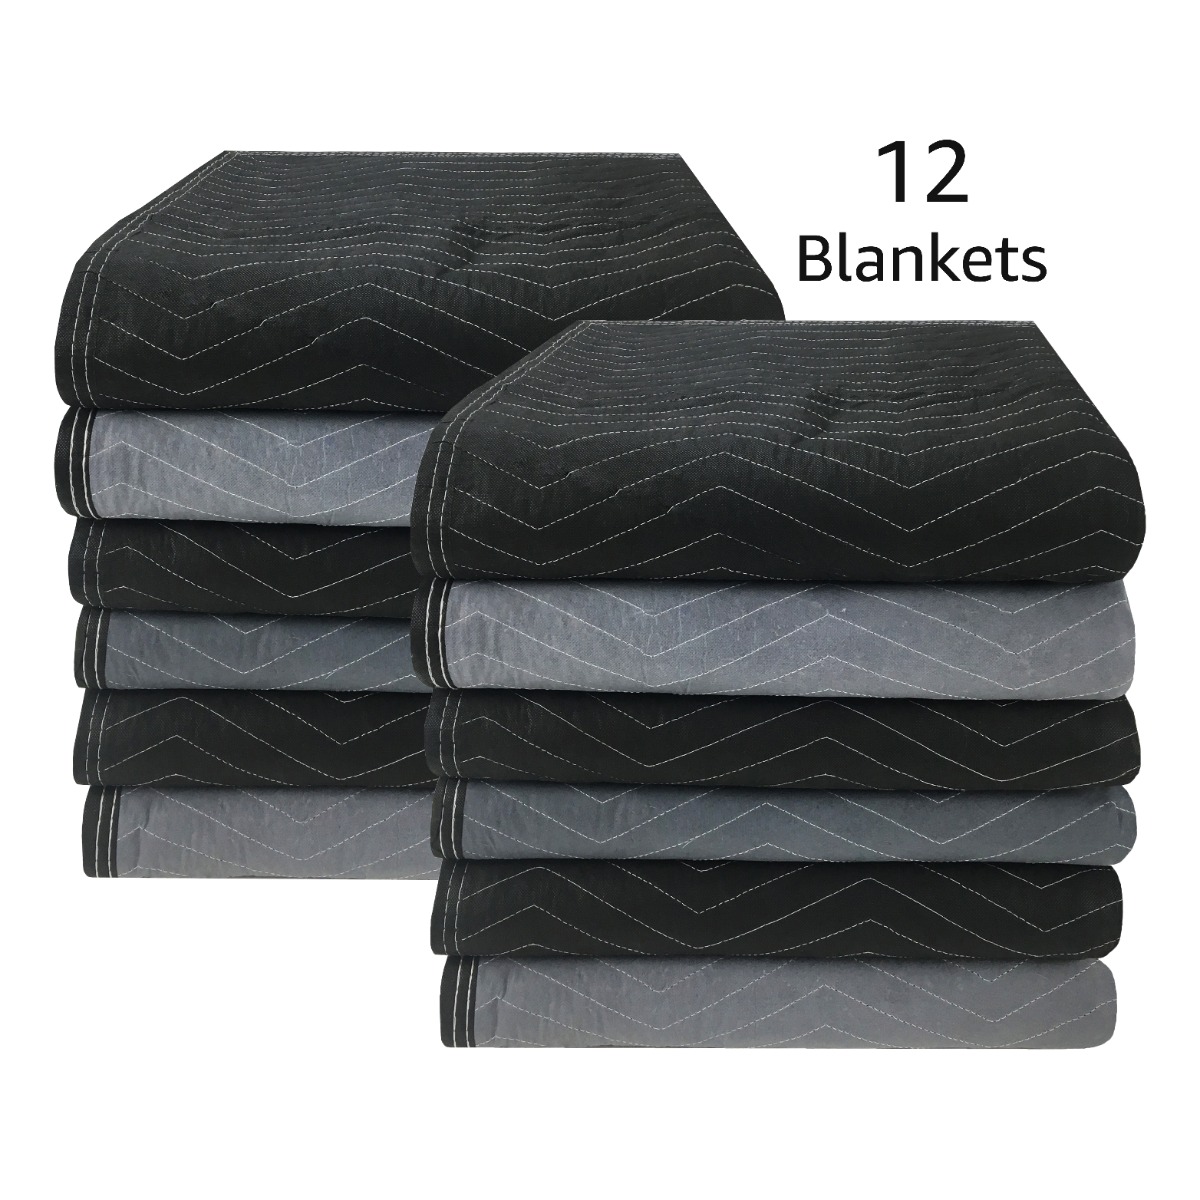 UBMOVE Extra Performance Blankets Cotton Poly 75lbs/doz (12 Pack)